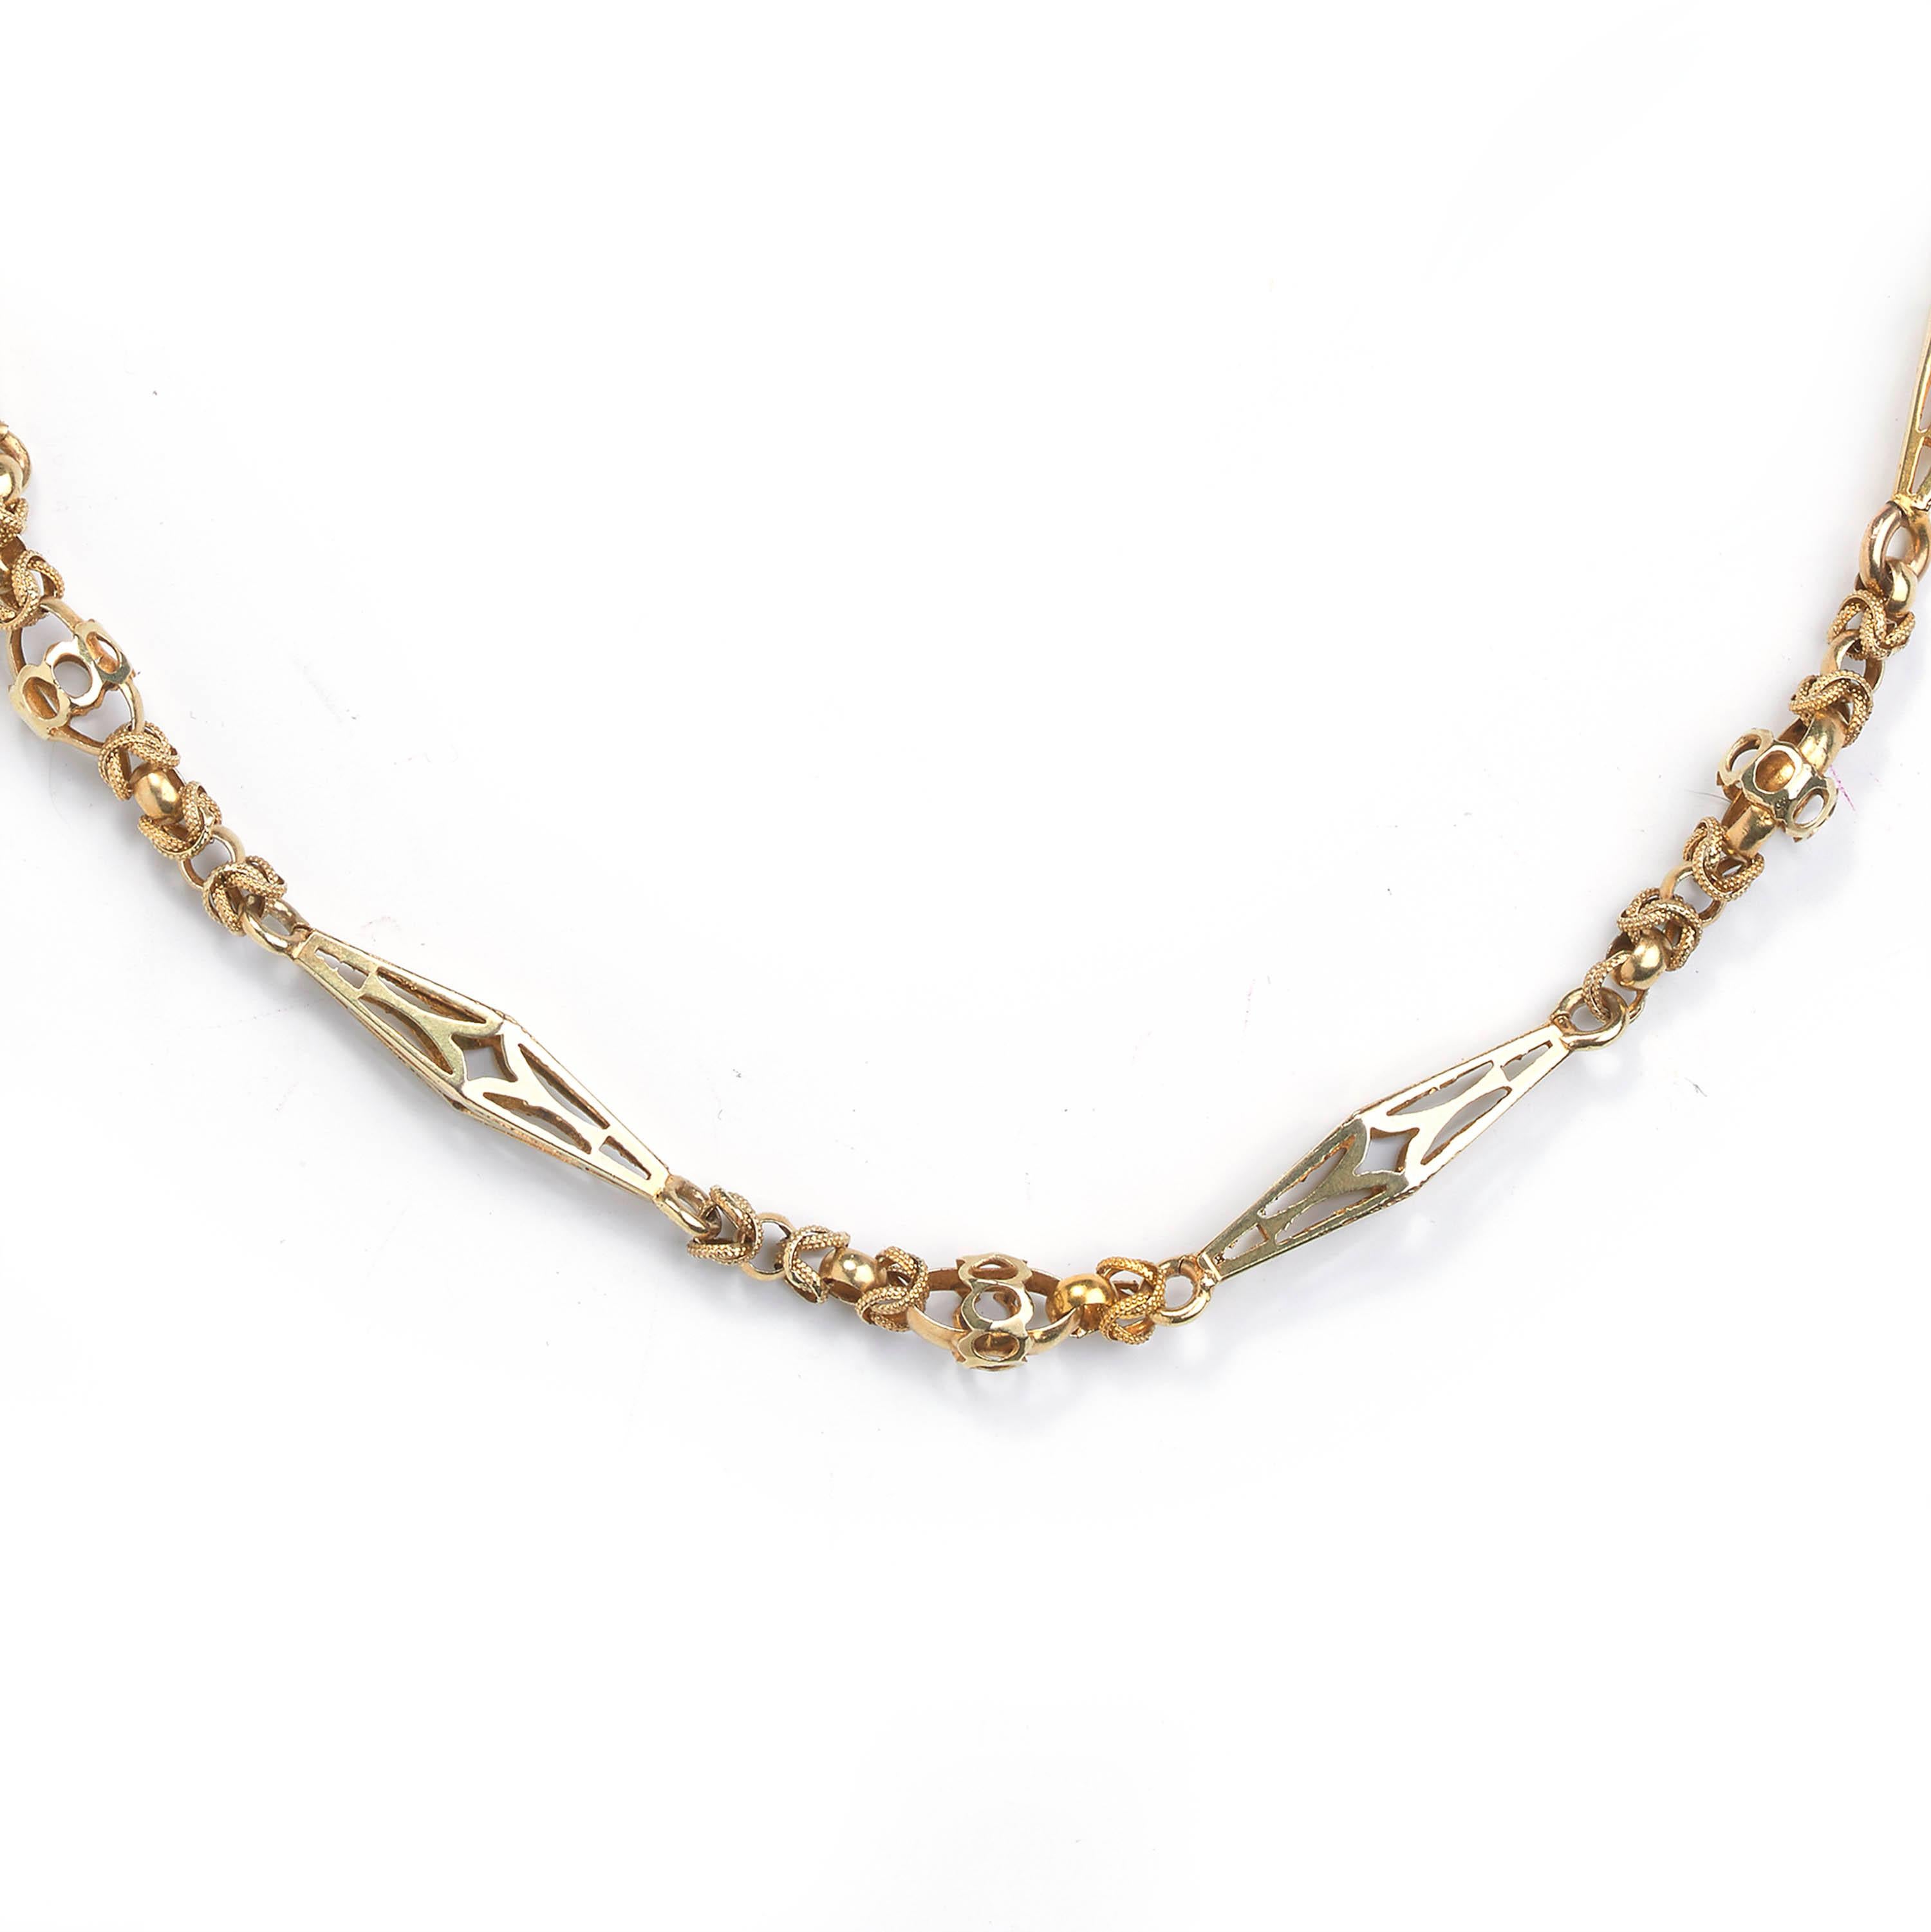 A Victorian gold fancy link long chain necklace, comprised of handmade open linked and decorative twisted interwoven links, with open pierced elongated rhombus motifs, with an engraved turquoise set torpedo rhombus clasp. Length approximately 114cm.